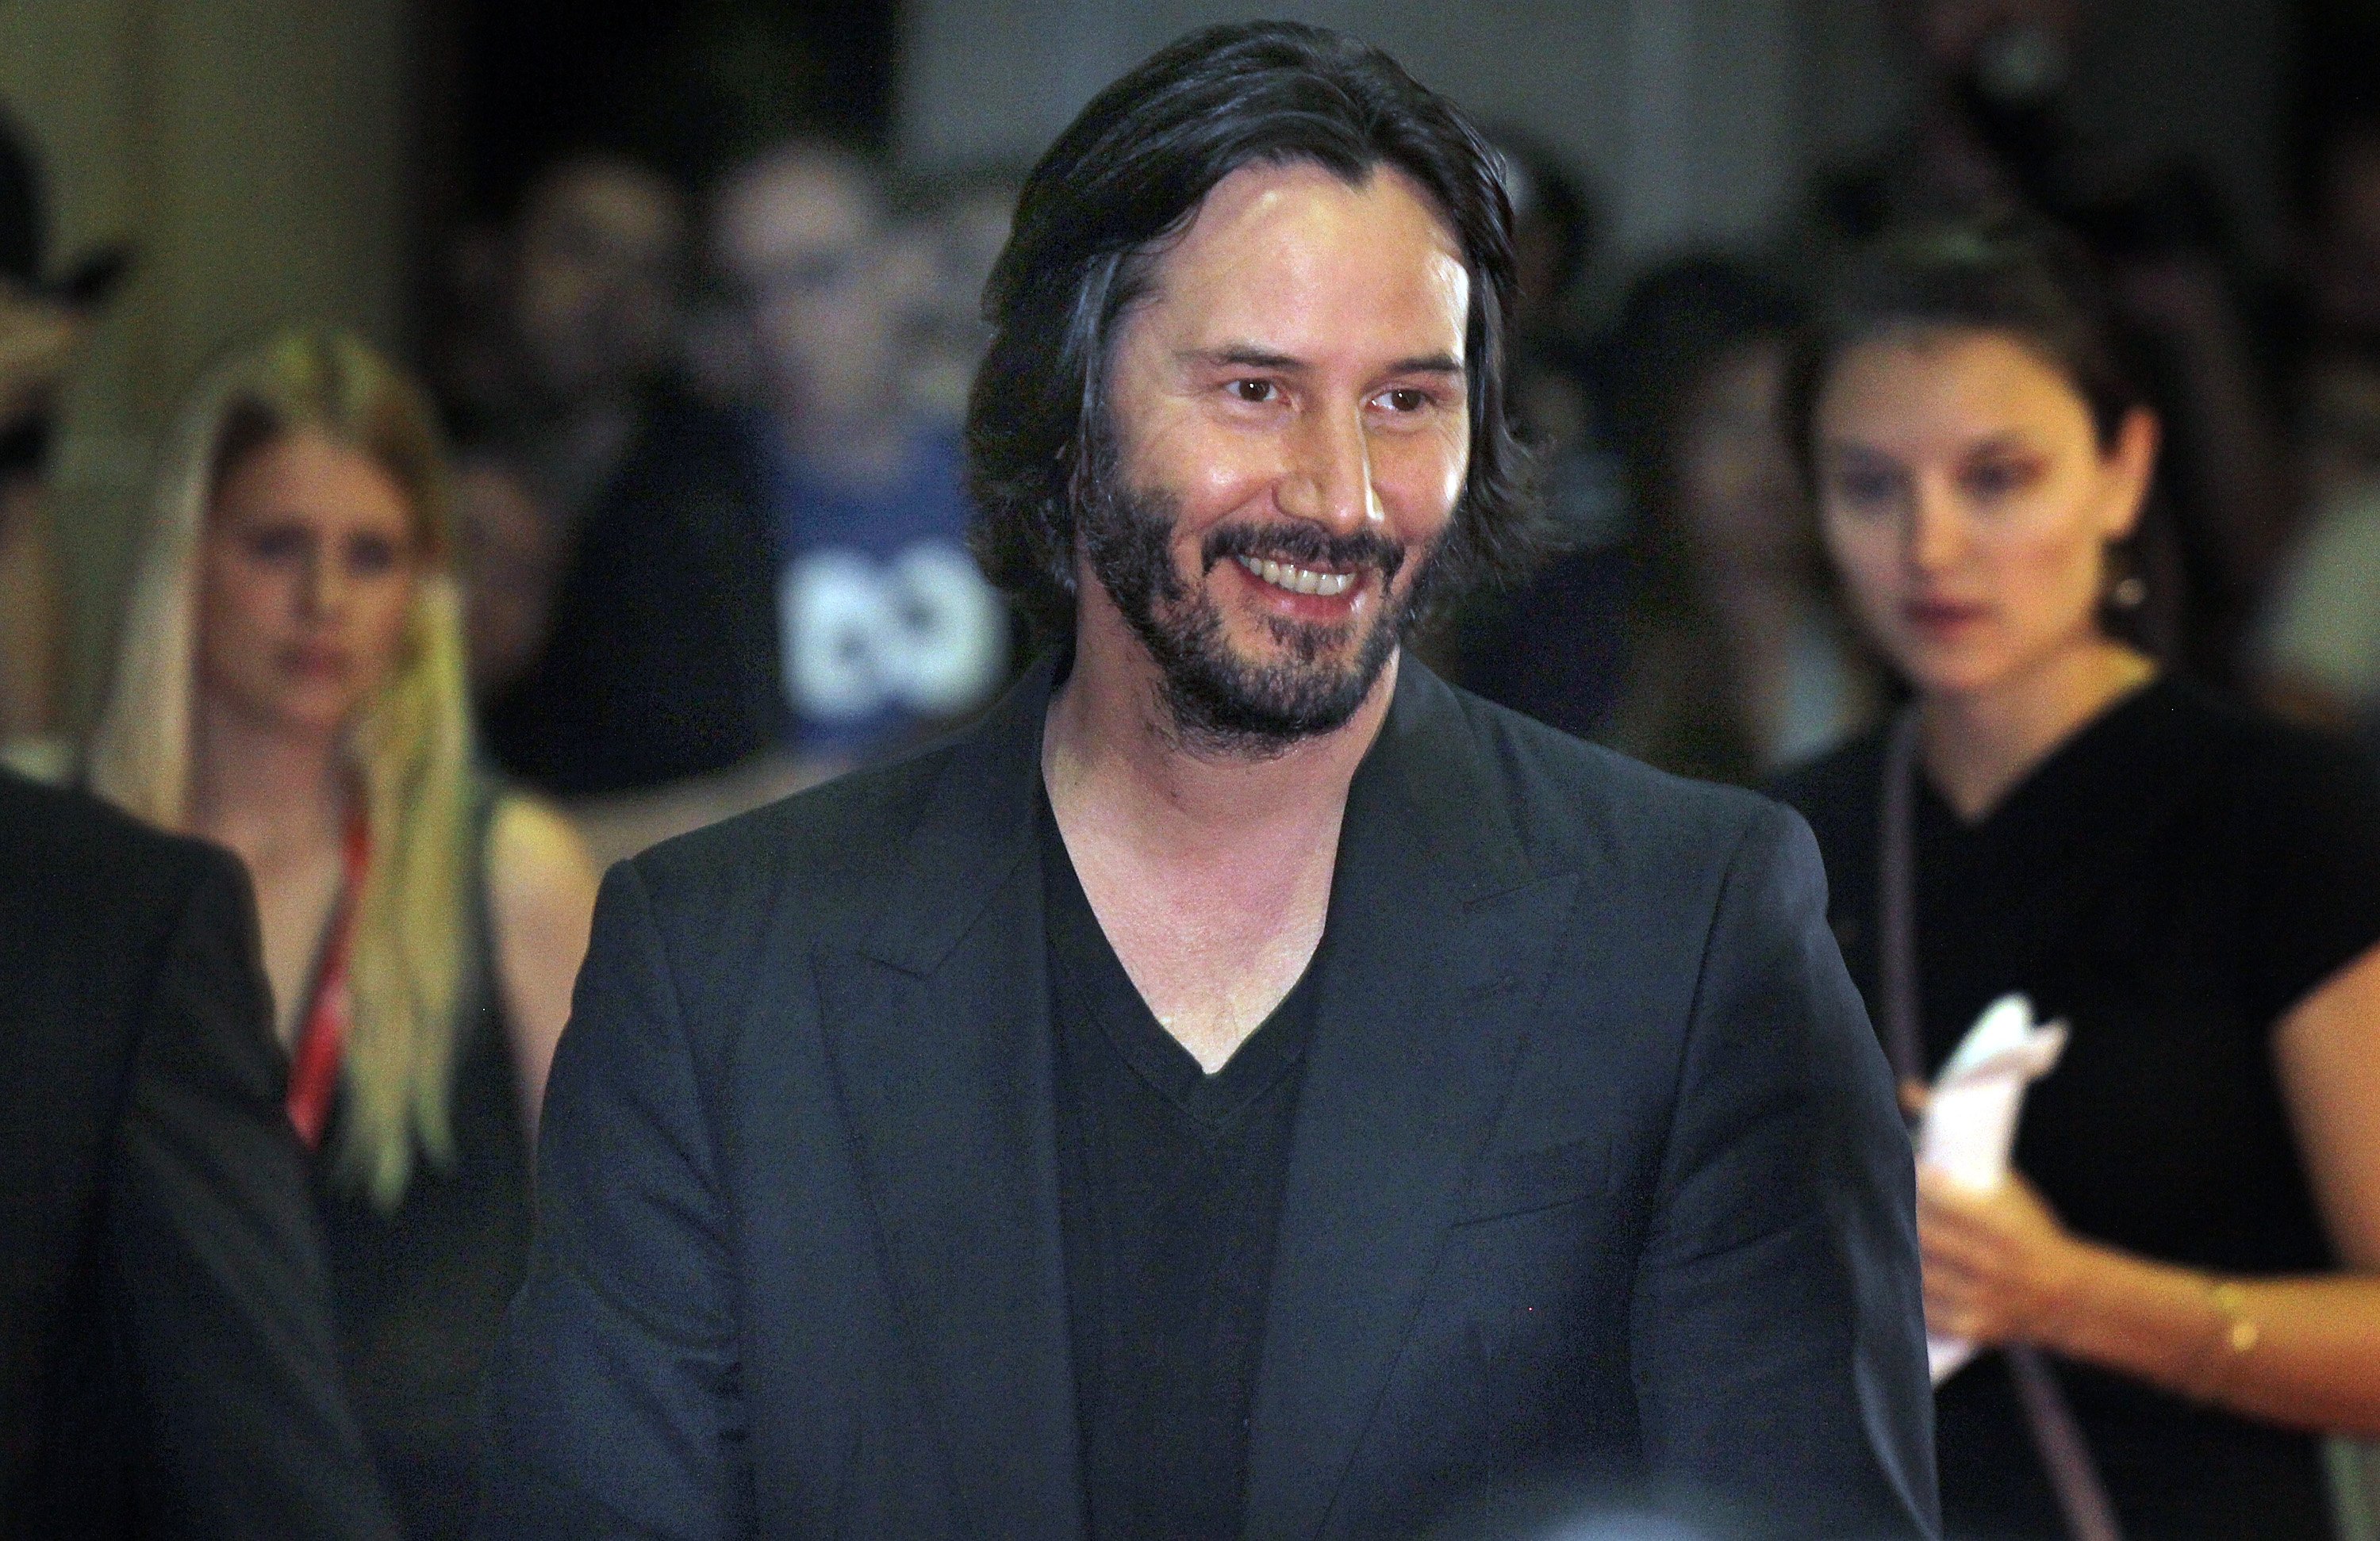 Keanu Reeves at the "Man Of Tai Chi" premiere during the 2013 Toronto International Film Festival at Ryerson Theatre on September 10, 2013, in Toronto, Canada. | Source: Getty Images